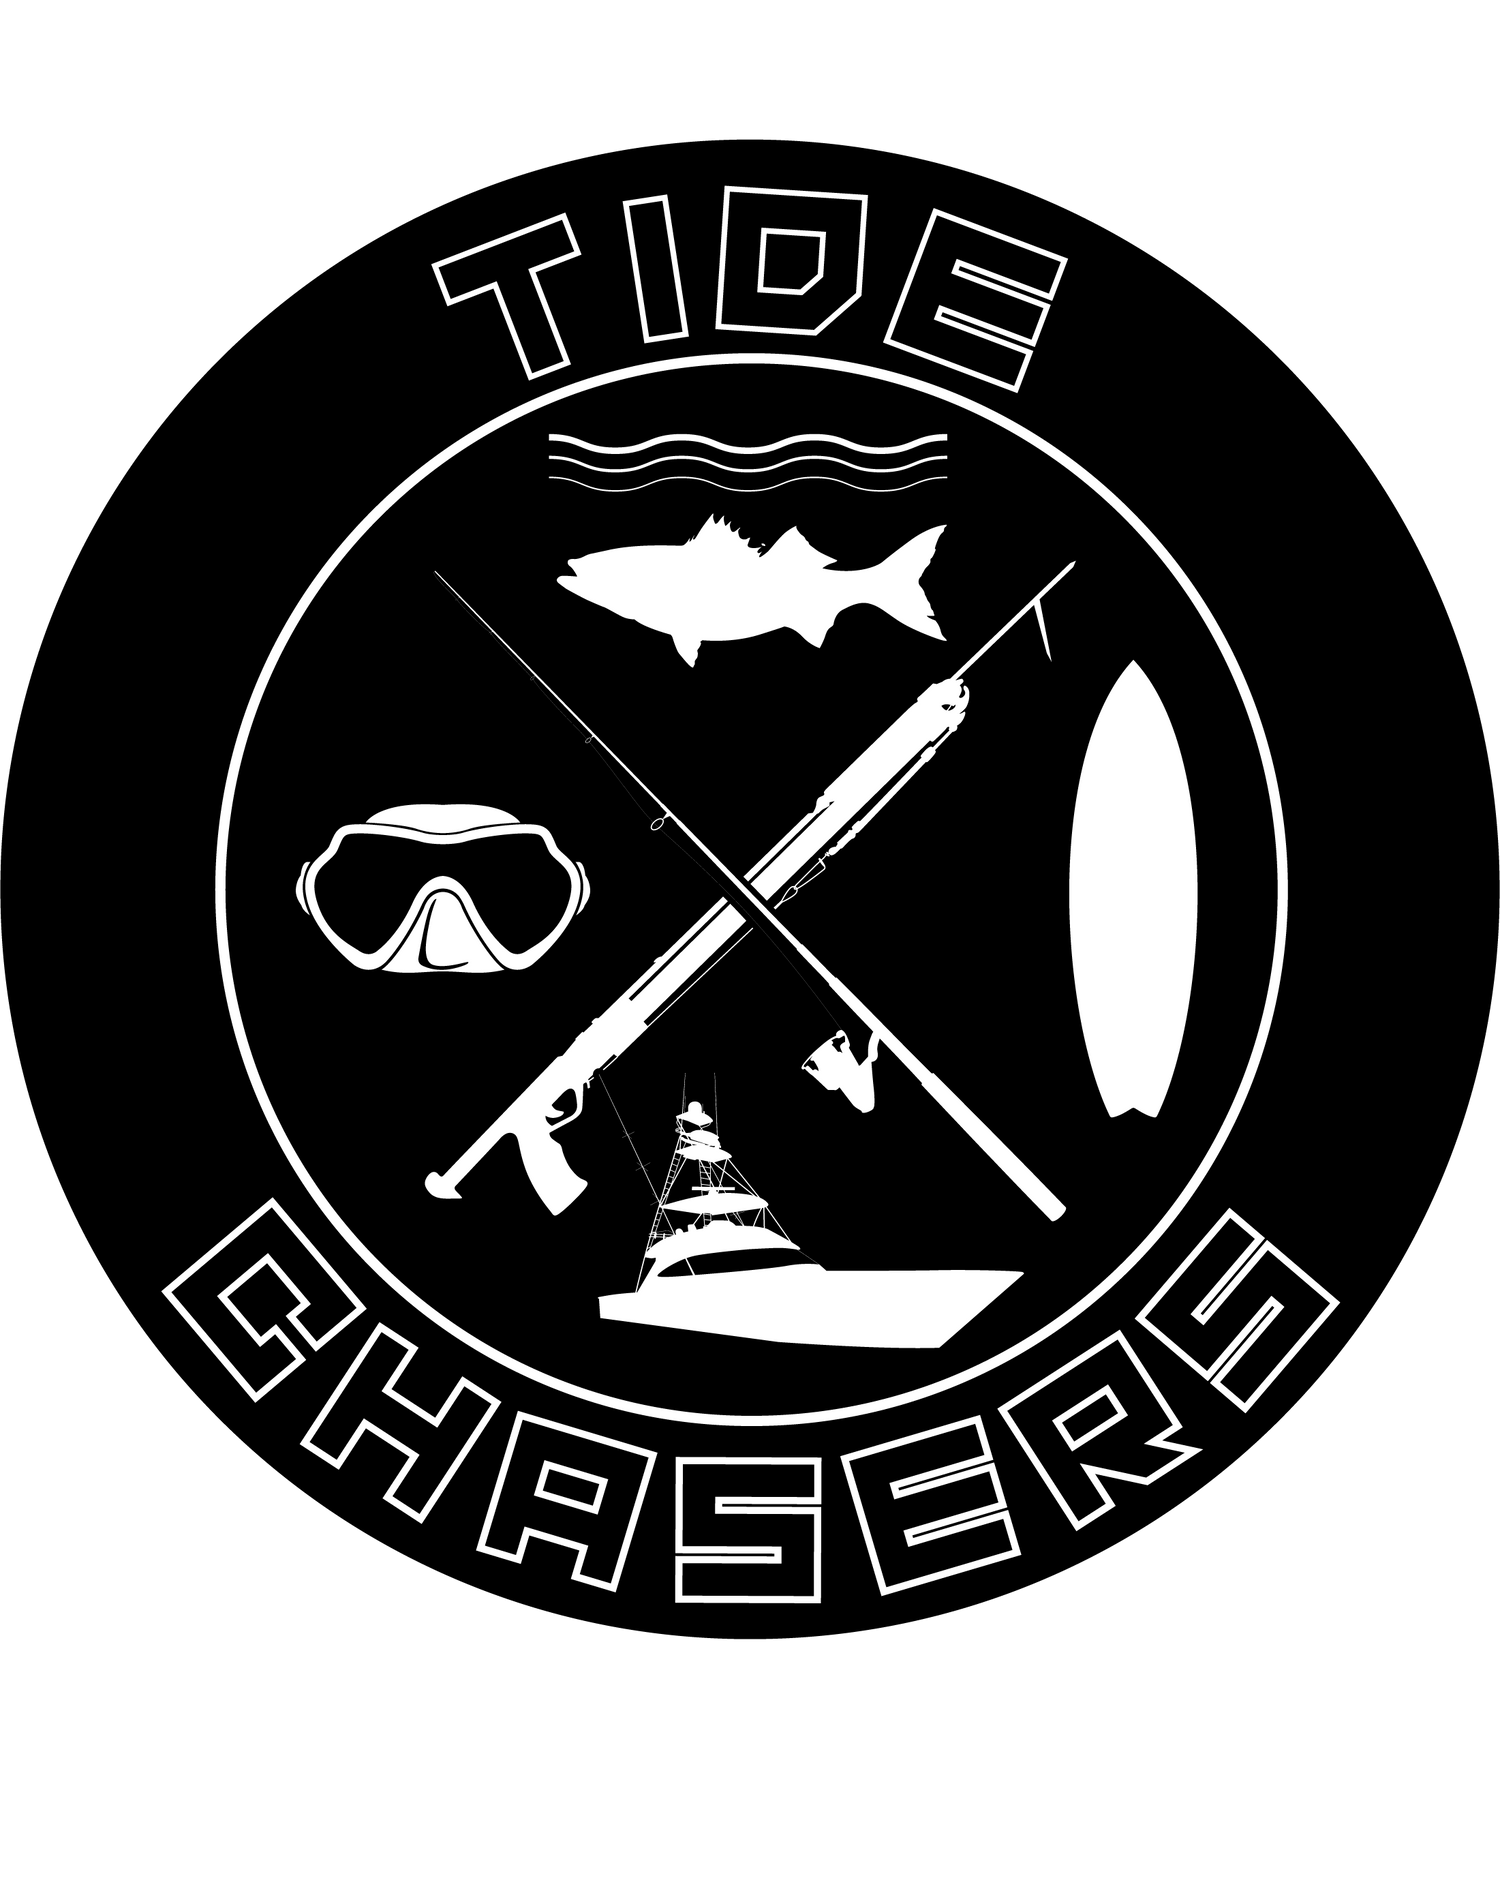 Tide Chasers